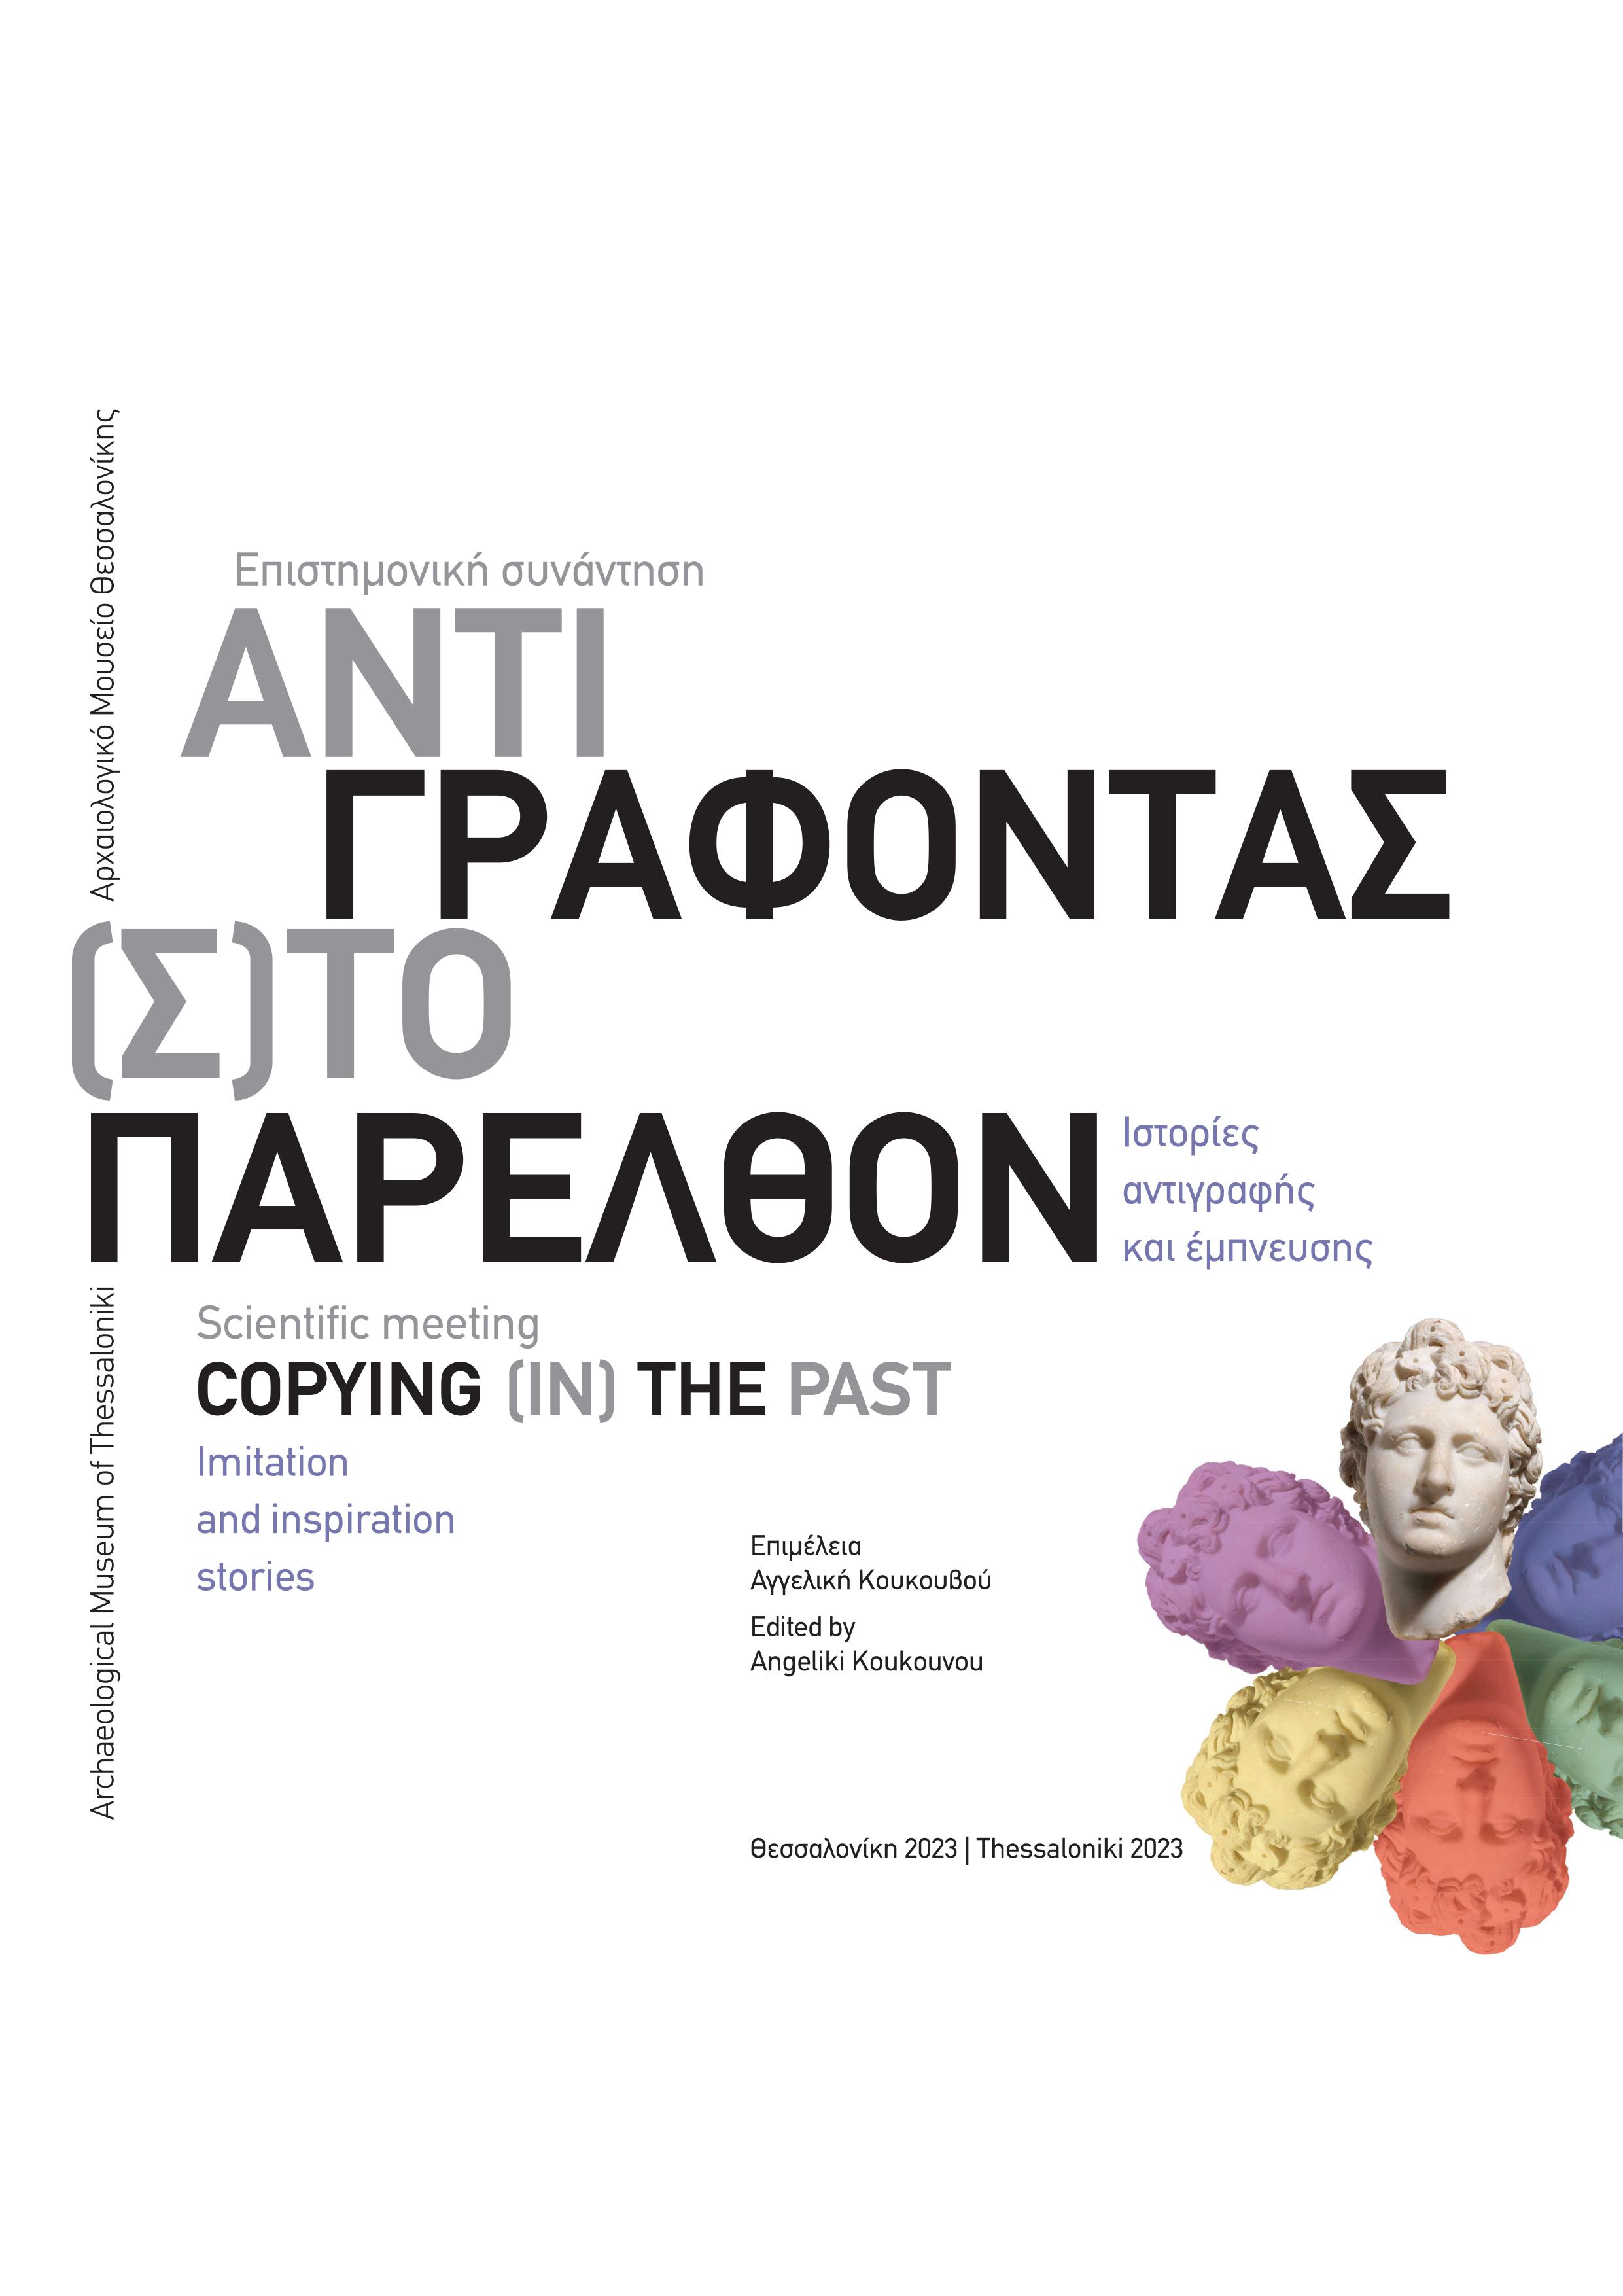 Koukouvou, Angeliki : Copying (in) the Past: Imitation and inspiration stories.